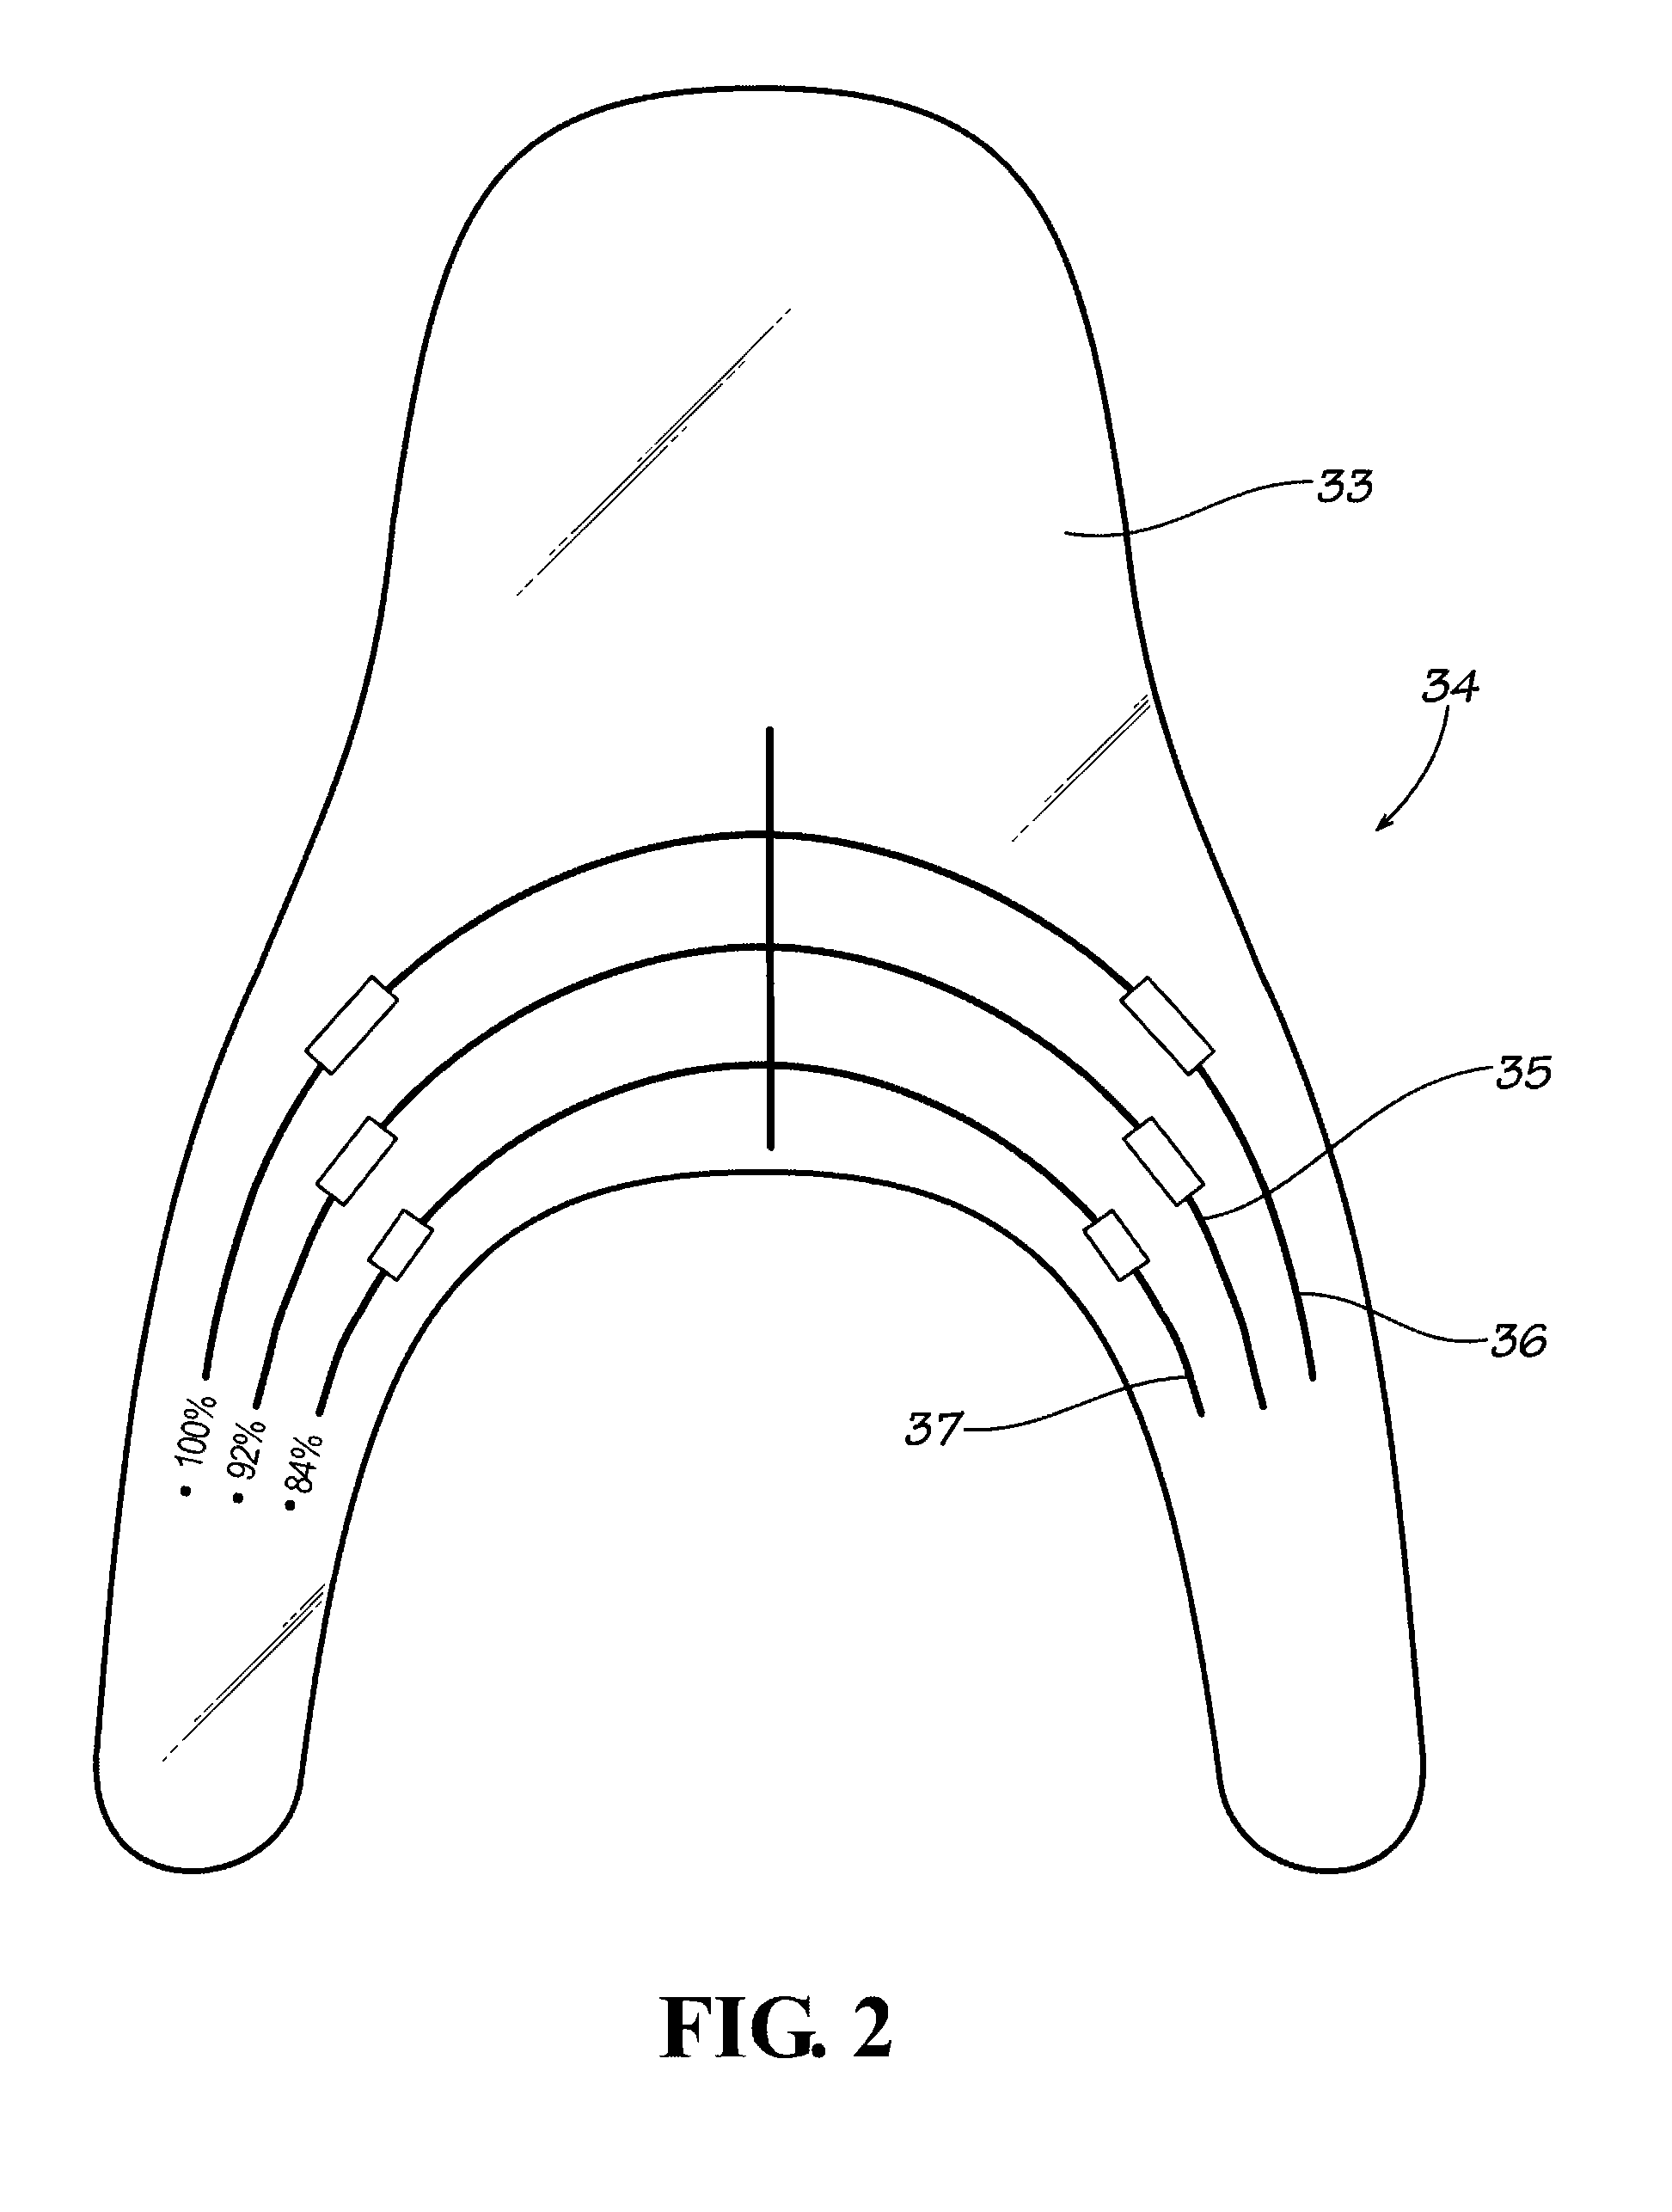 Template for Selecting Orthodontic Arch Wires and Method of Placement